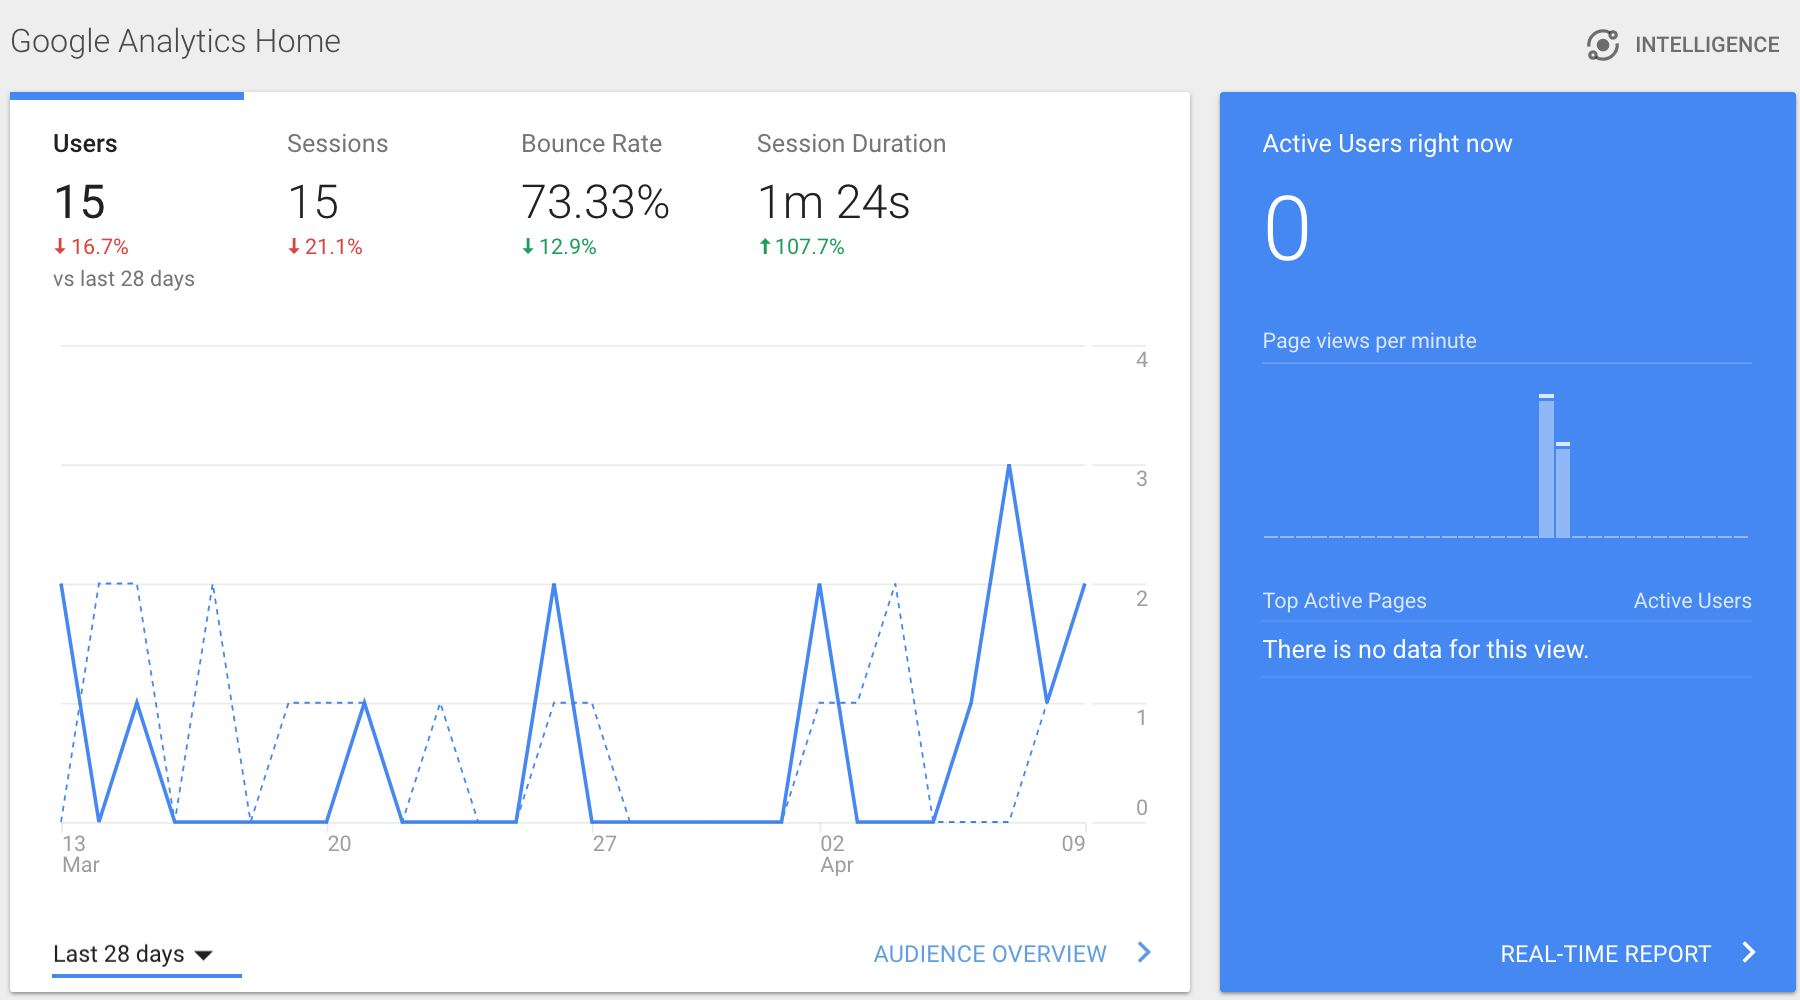 Google Analytics users statistics for this site